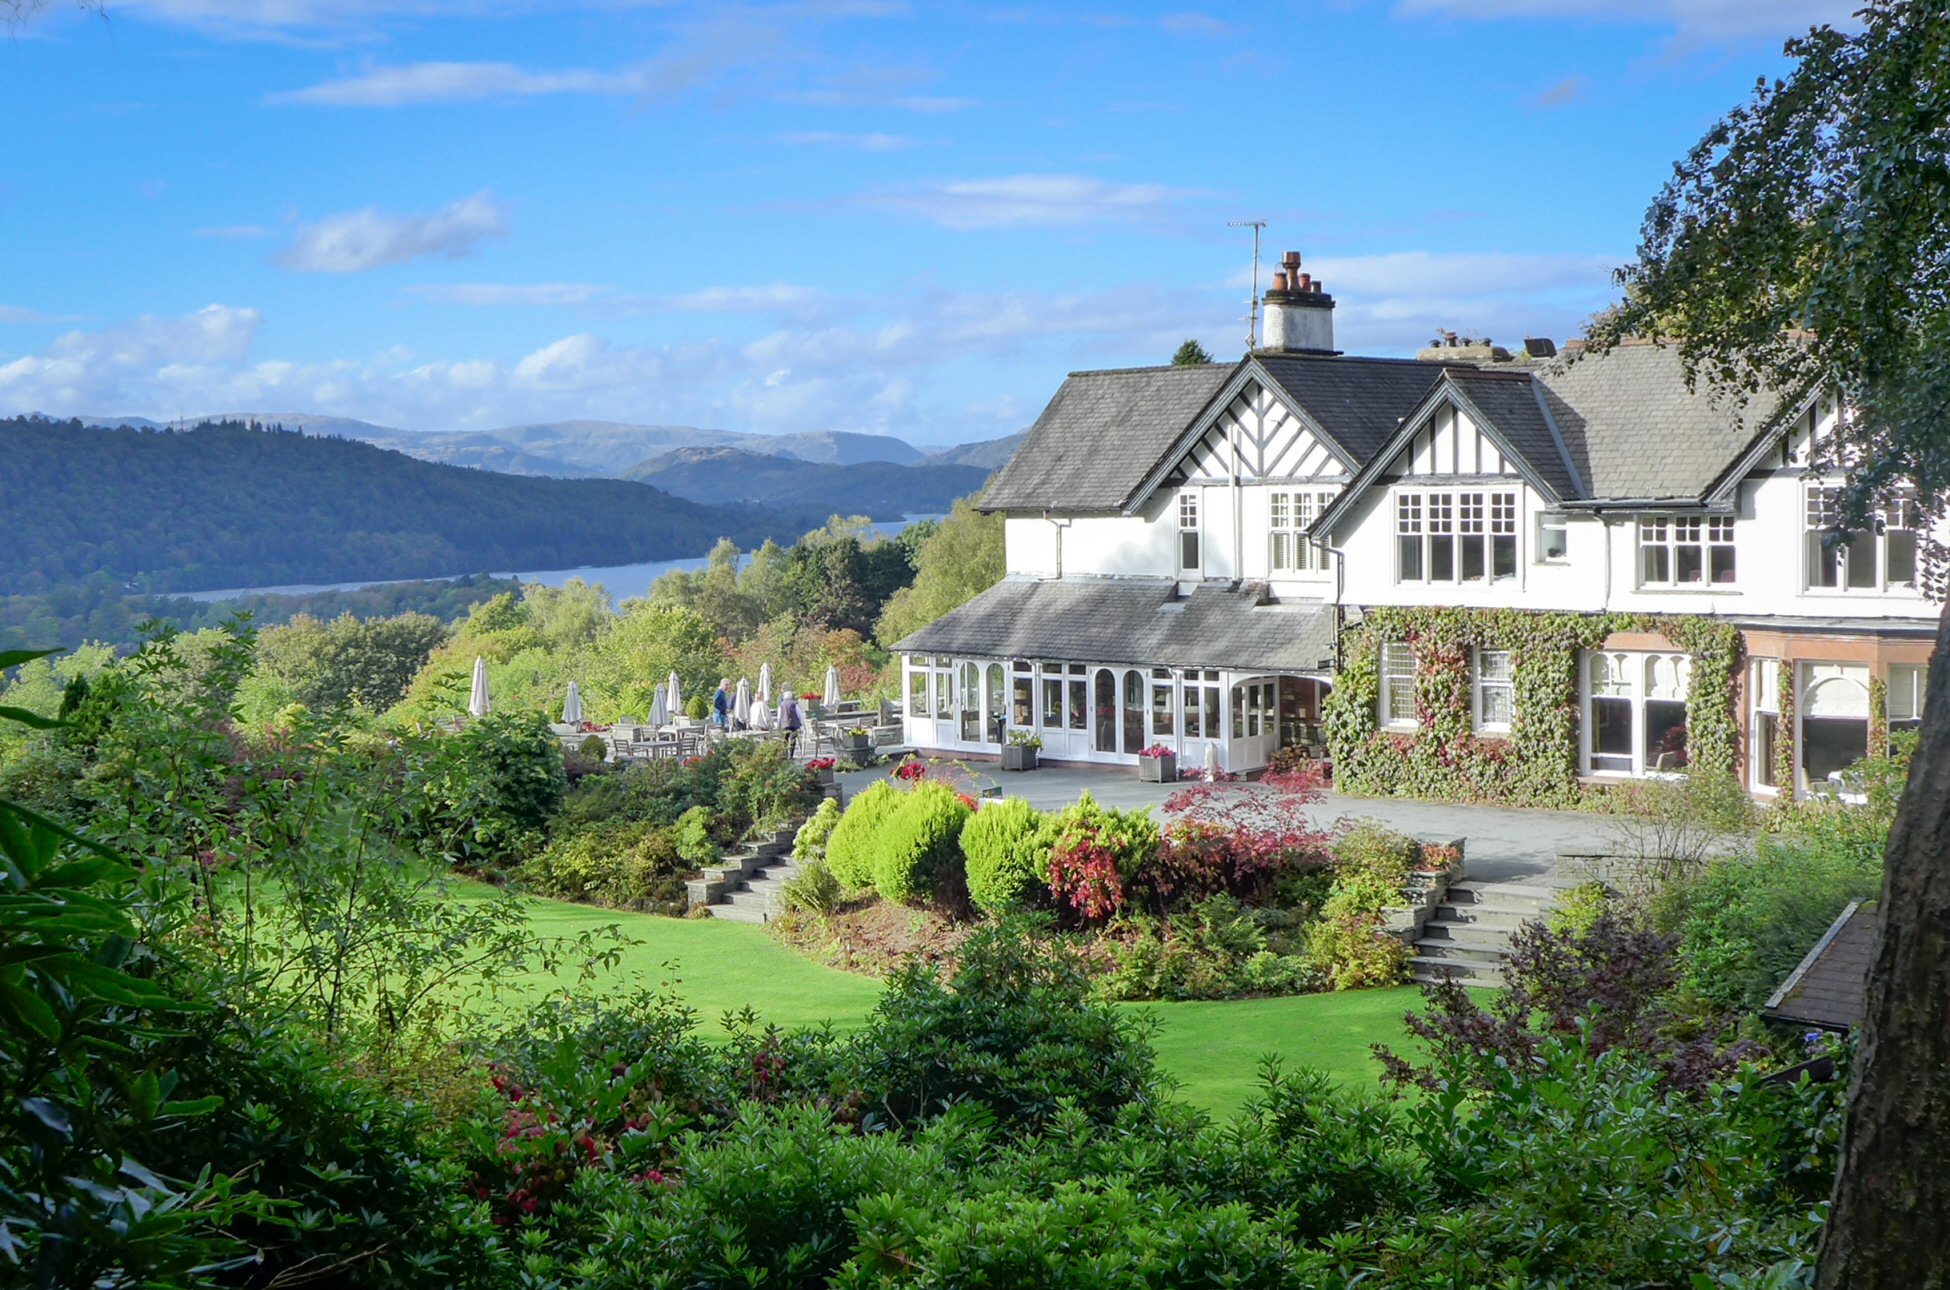 Find inspiration from Potter and Wordsworth on a Lake District writing break